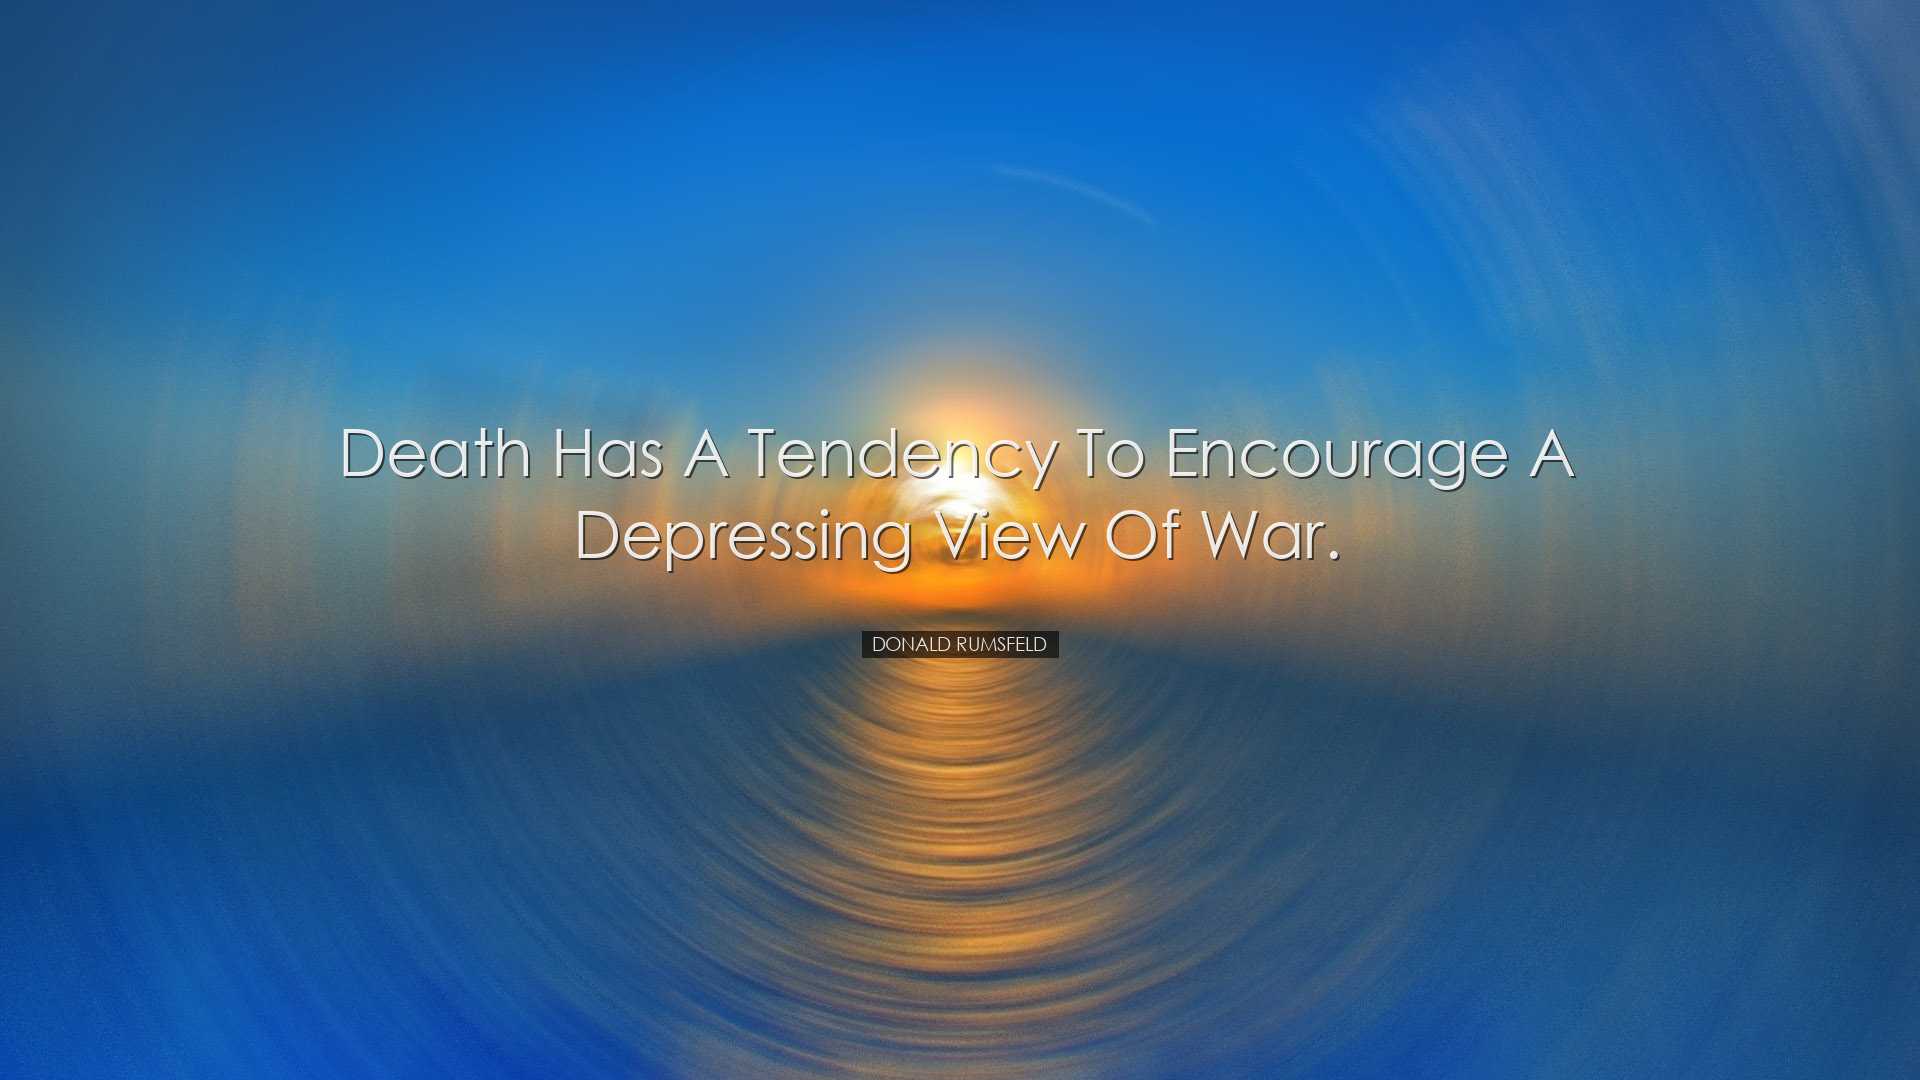 Death has a tendency to encourage a depressing view of war. - Dona